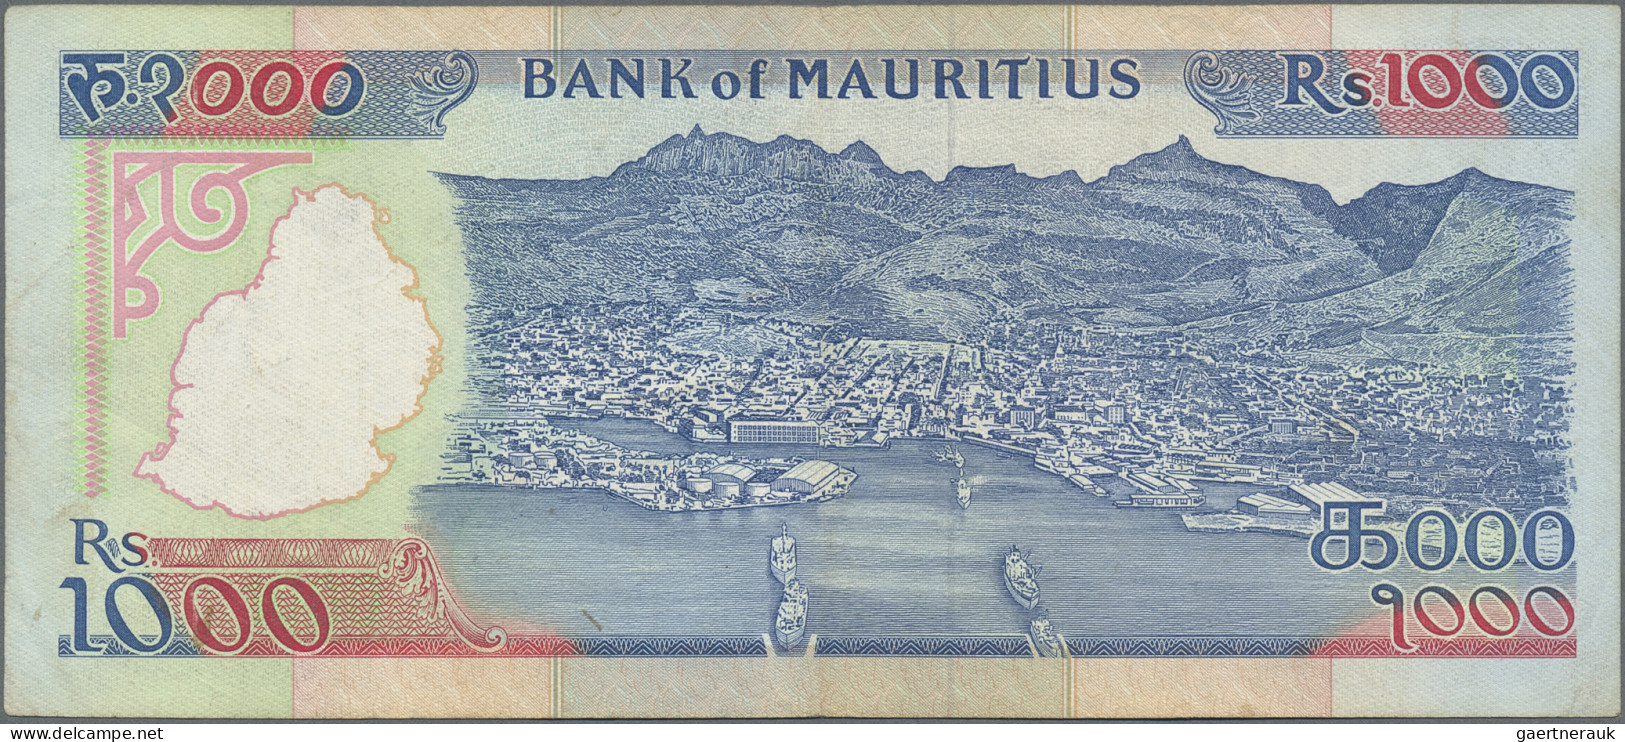 Mauritius: Bank Of Mauritius, 1.000 Rupees ND(1991), P.41, Still Very Nice With - Mauritius